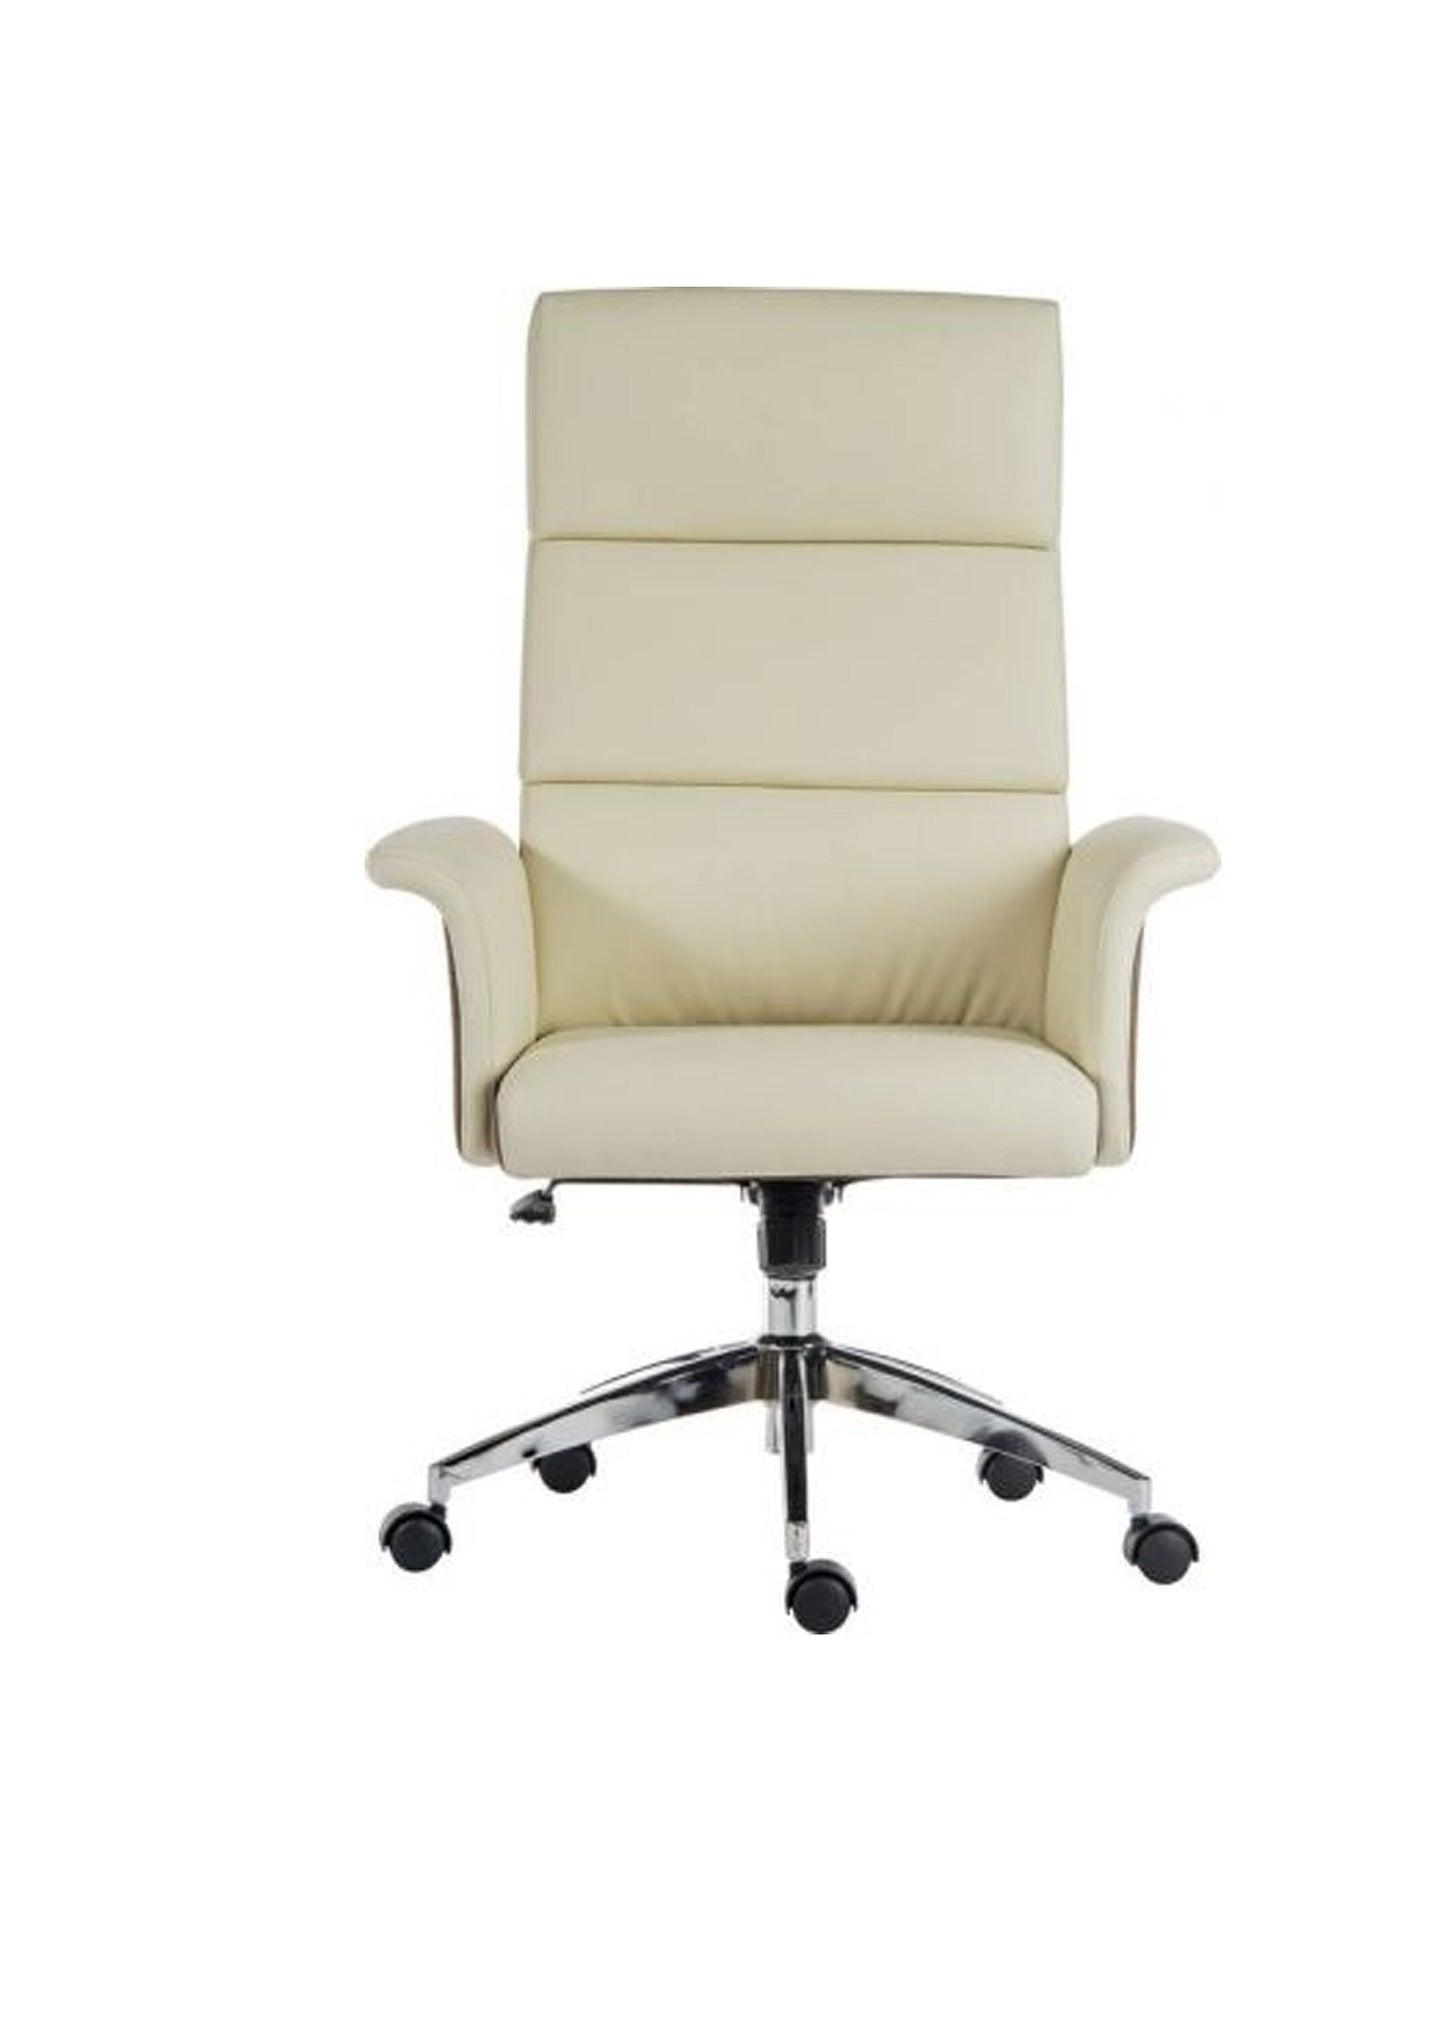 Mid-Century Swivel Office Chair With High Back